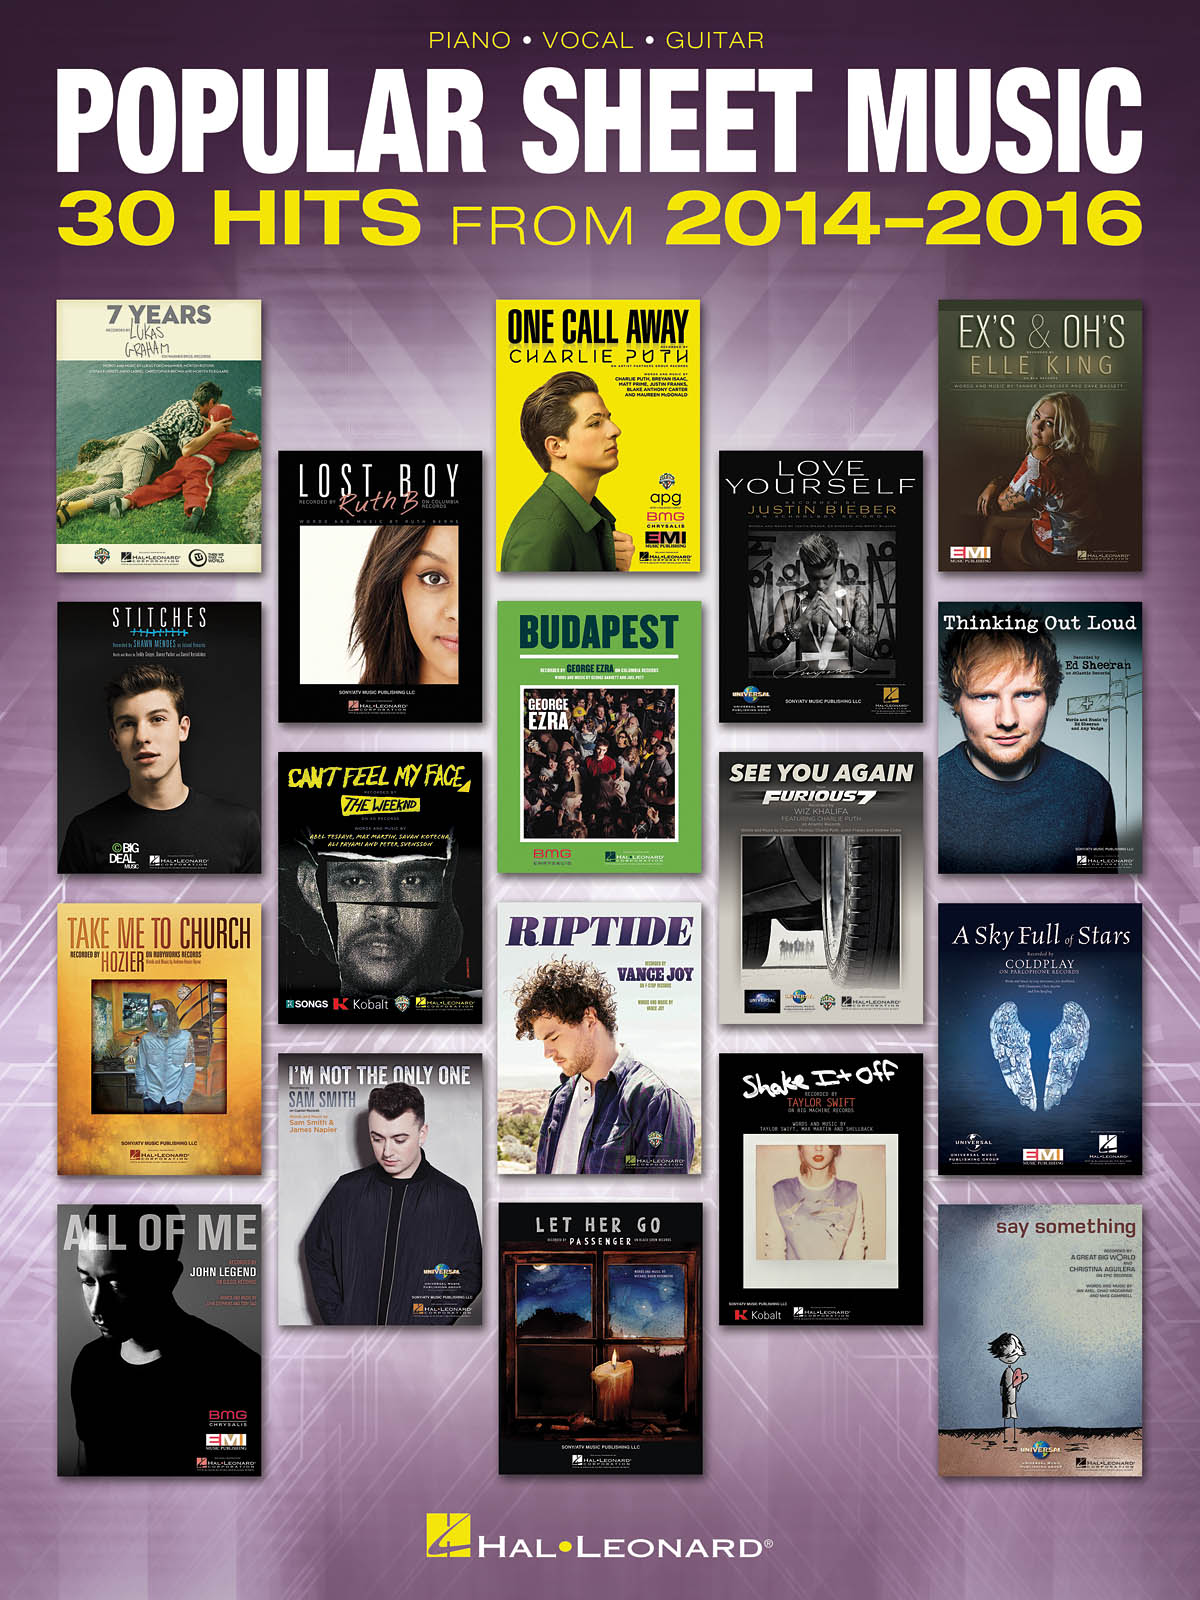 Popular Sheet Music - 30 Hits from 2014-2016